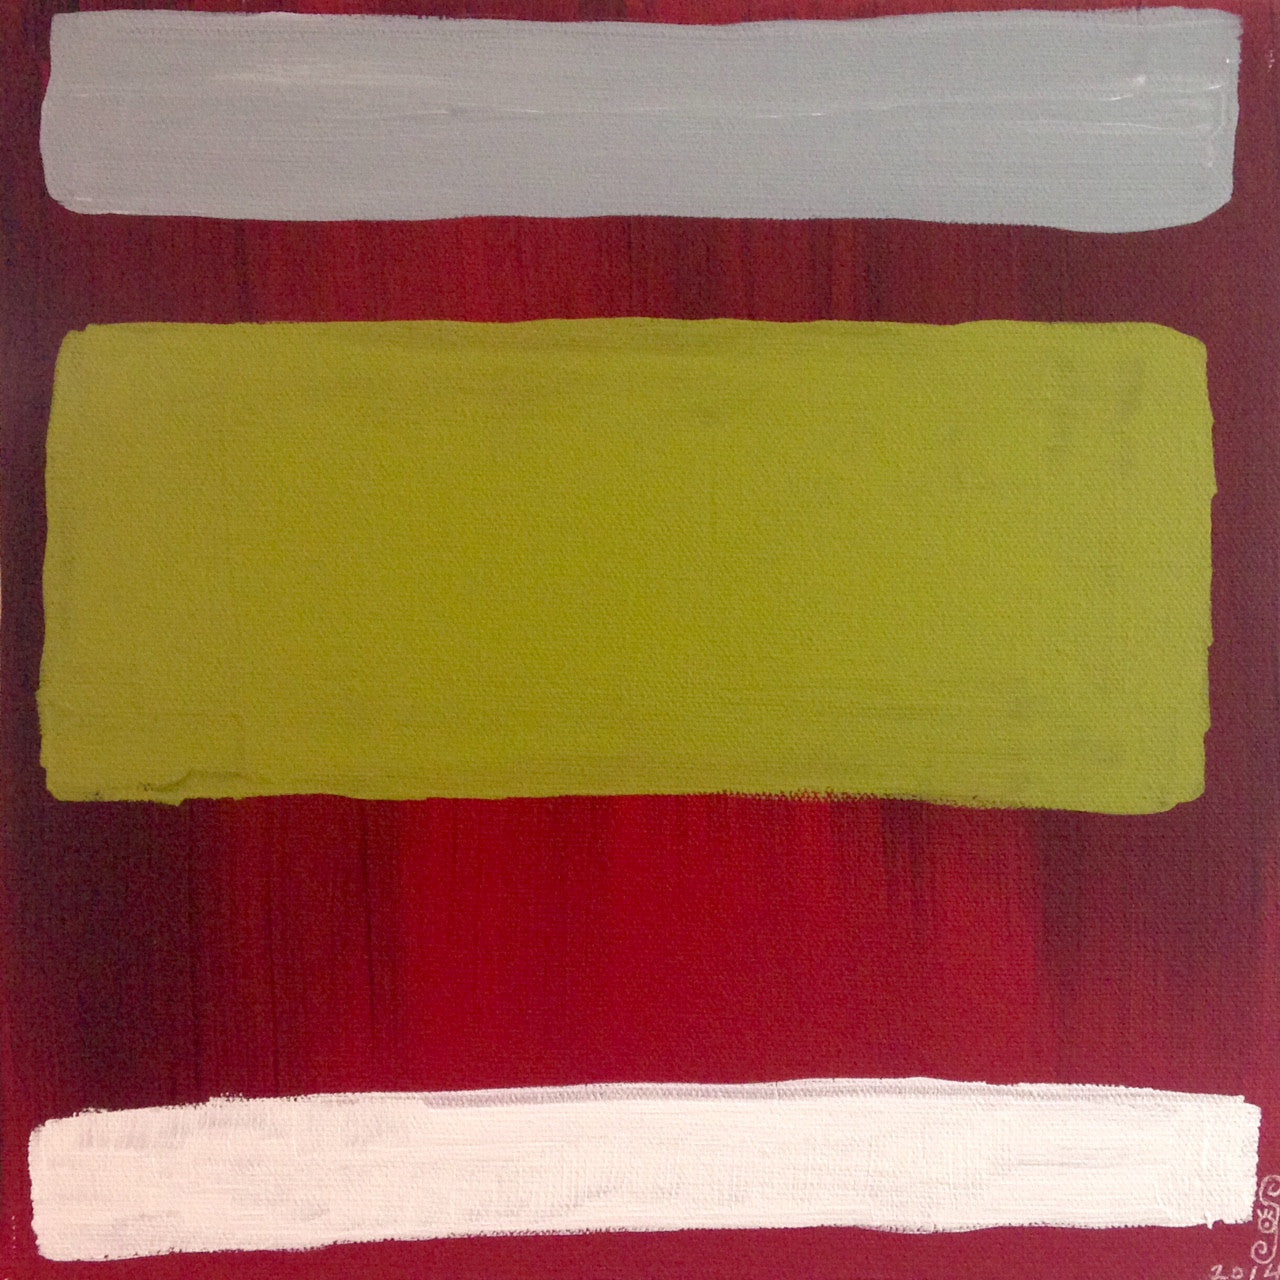 Day 95- Red, black, gray, olive and white- Tribute to Mark Rothko